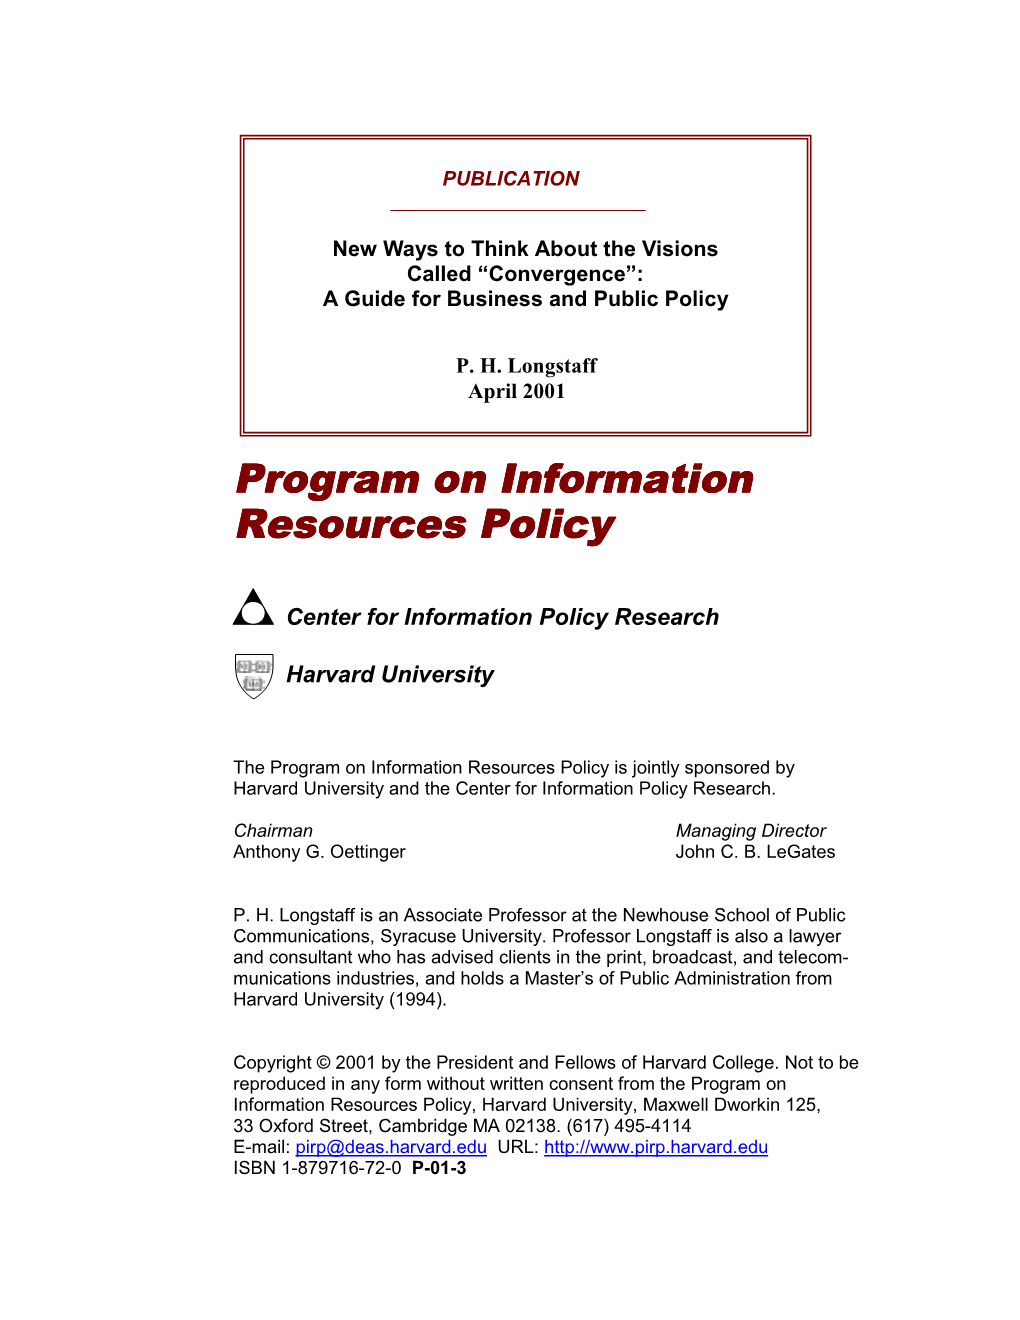 Program on Information Resources Policy